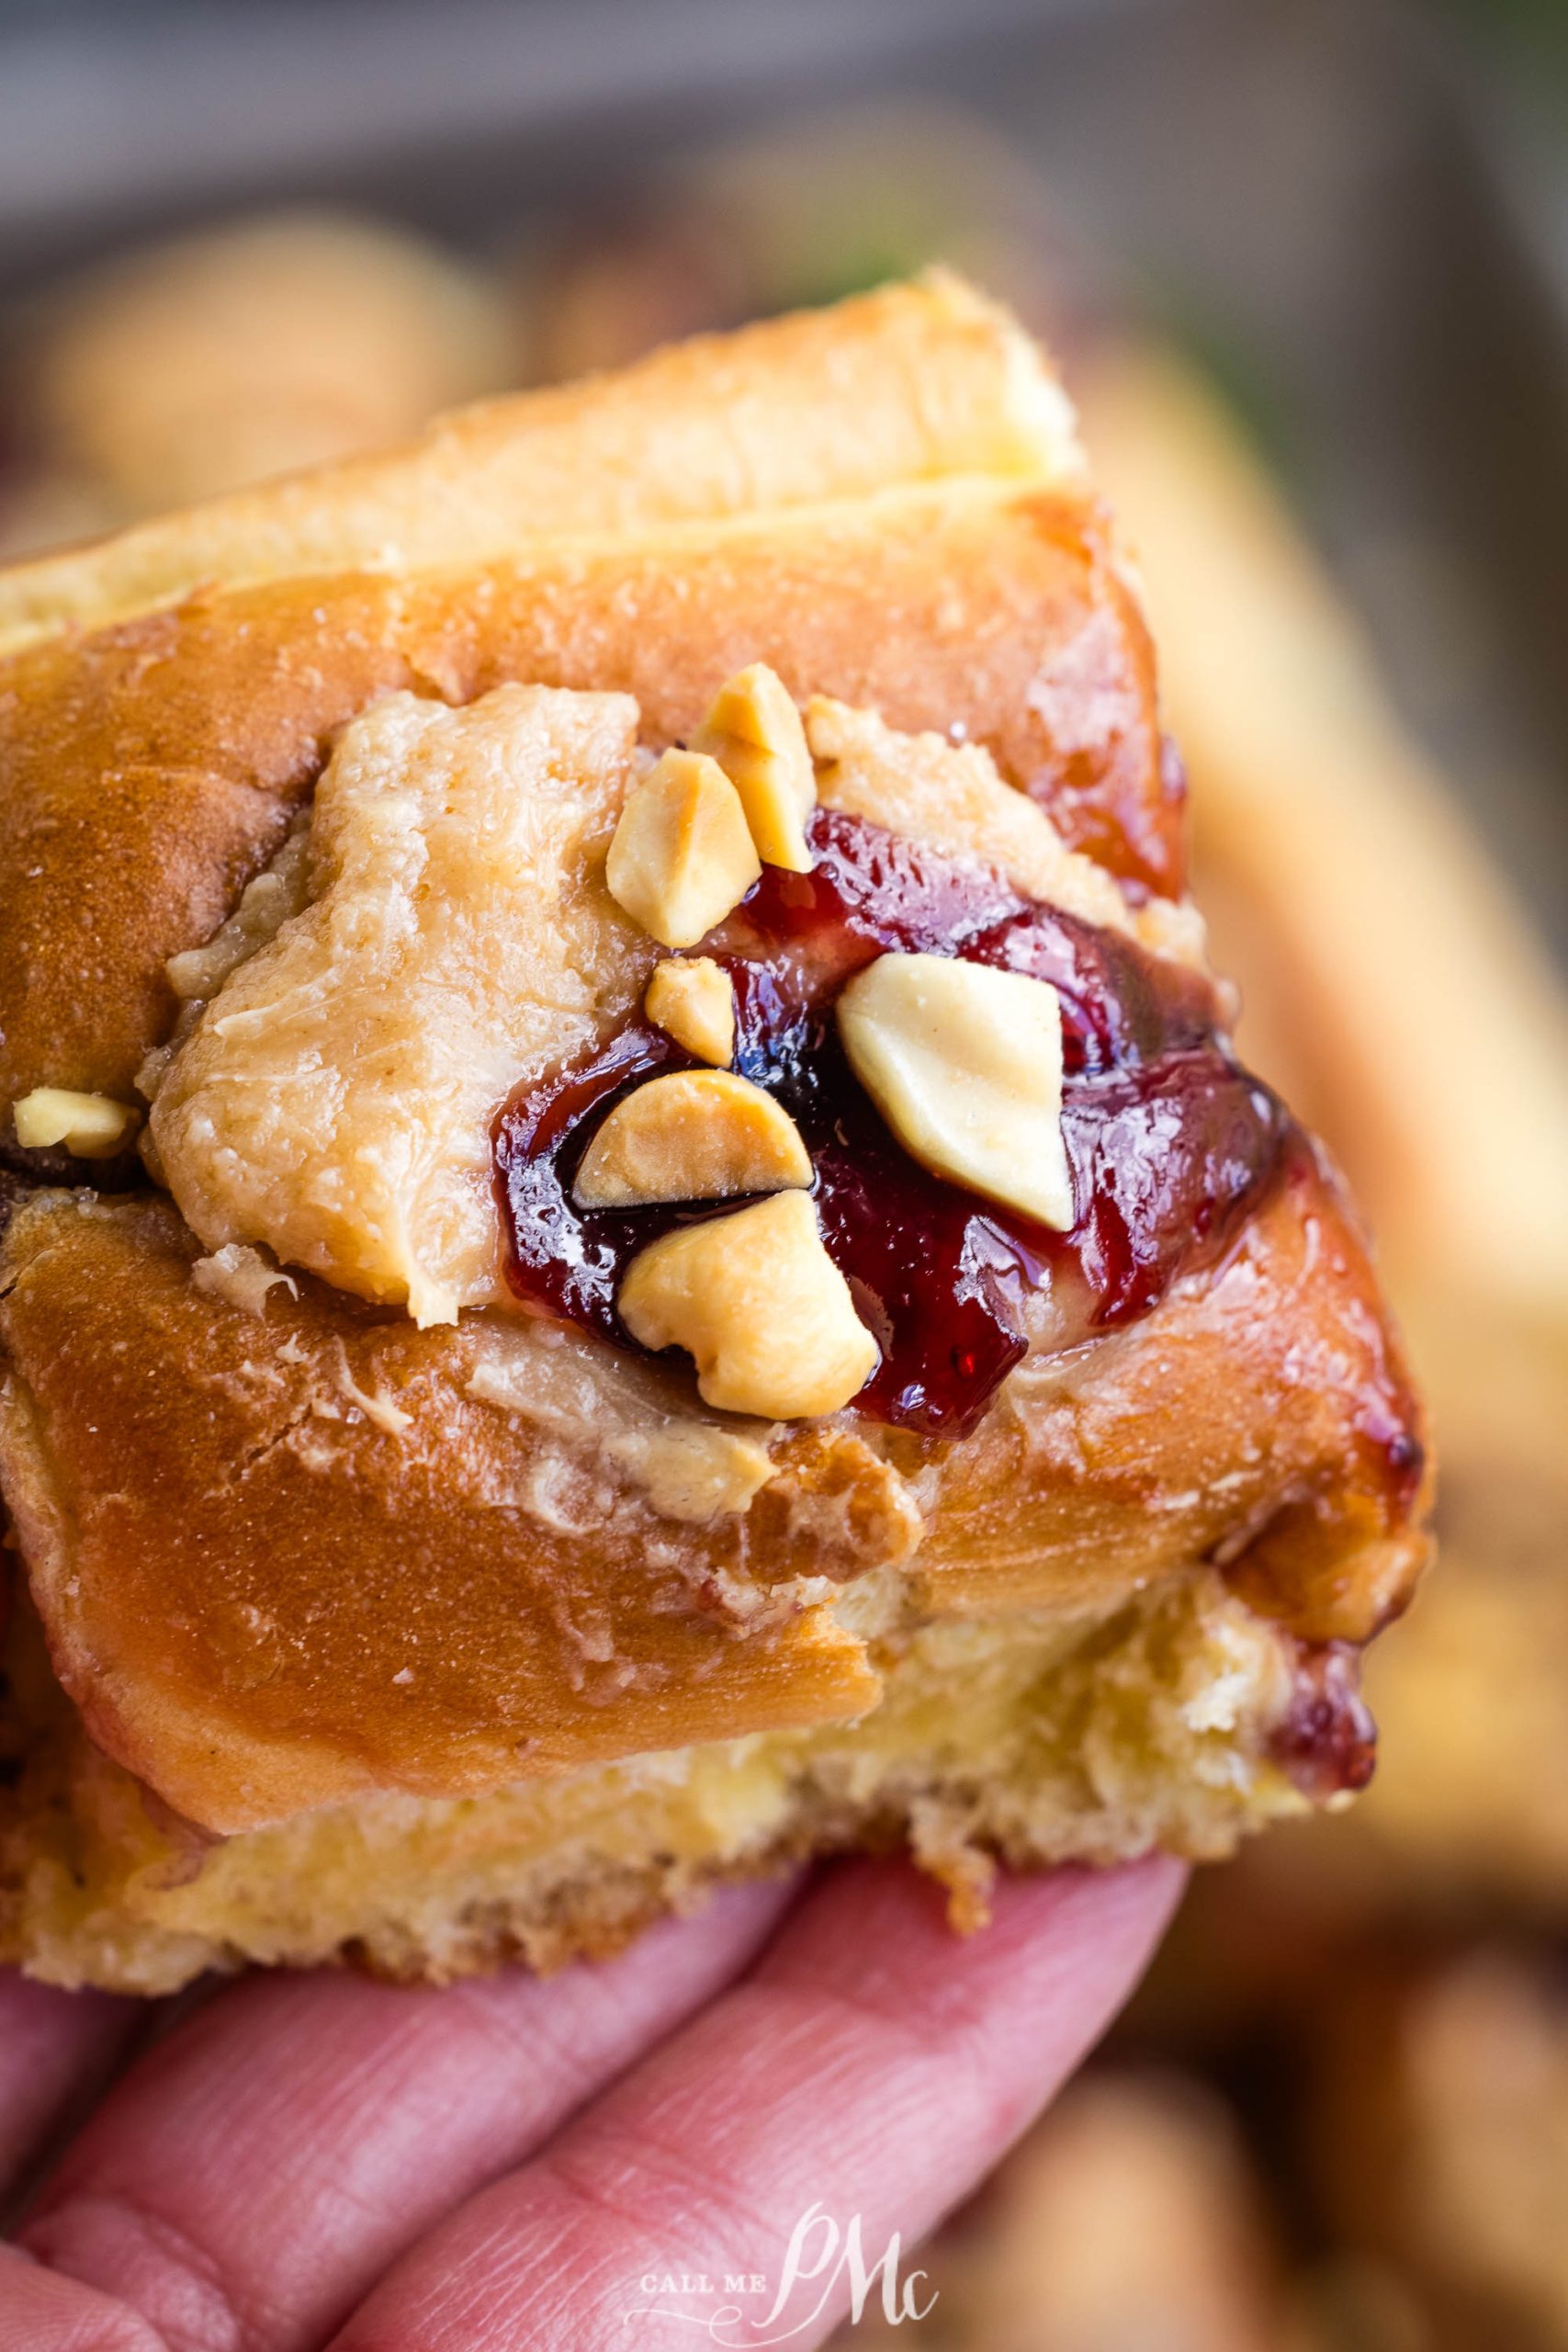 Close-up of a peanut butter and jelly sandwich with visible peanut chunks.